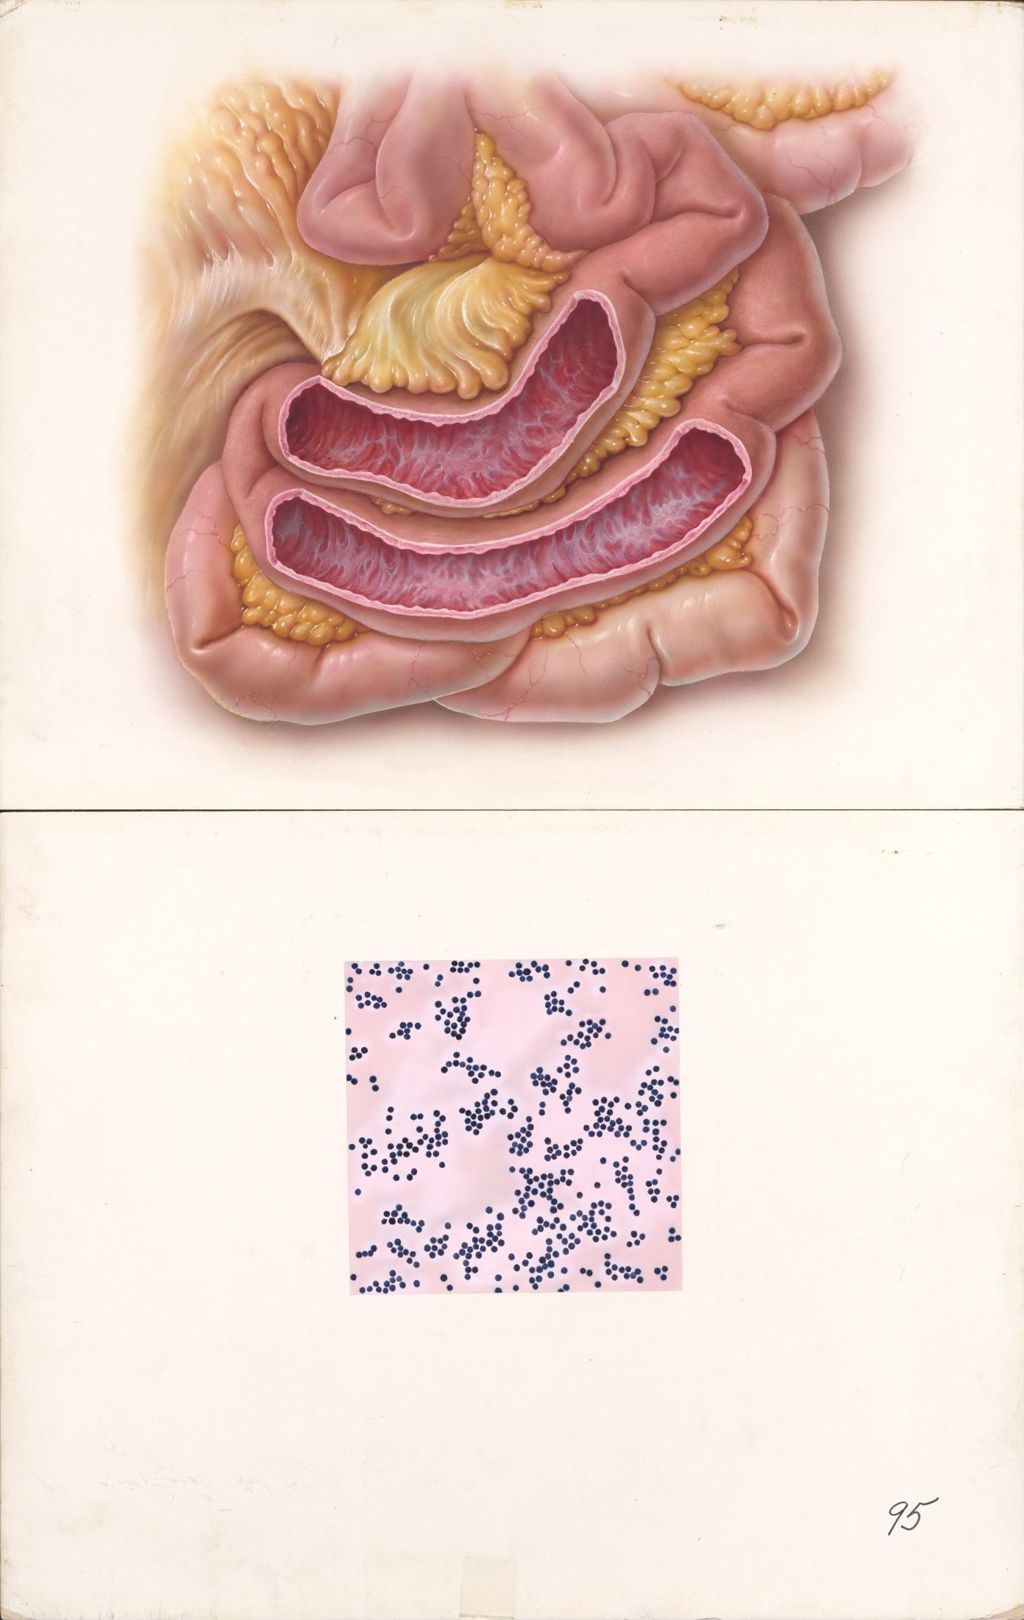 Medical Profiles, Ne[illegible]adine Infections of the Intestine, Plate I, Acute Staphylococcal Enteritis